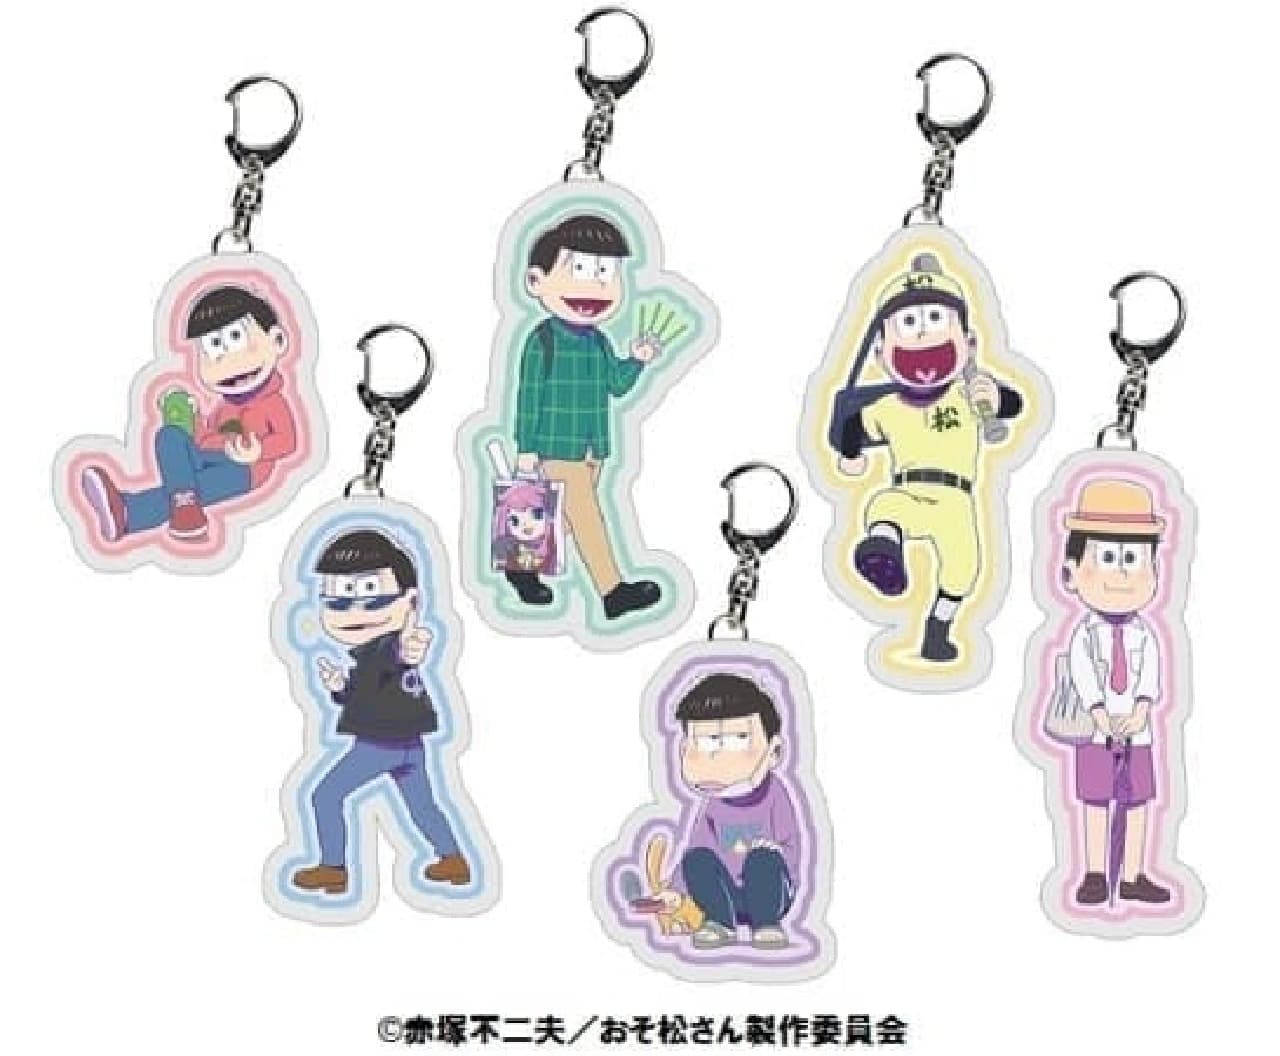 6 types of trading acrylic key chains